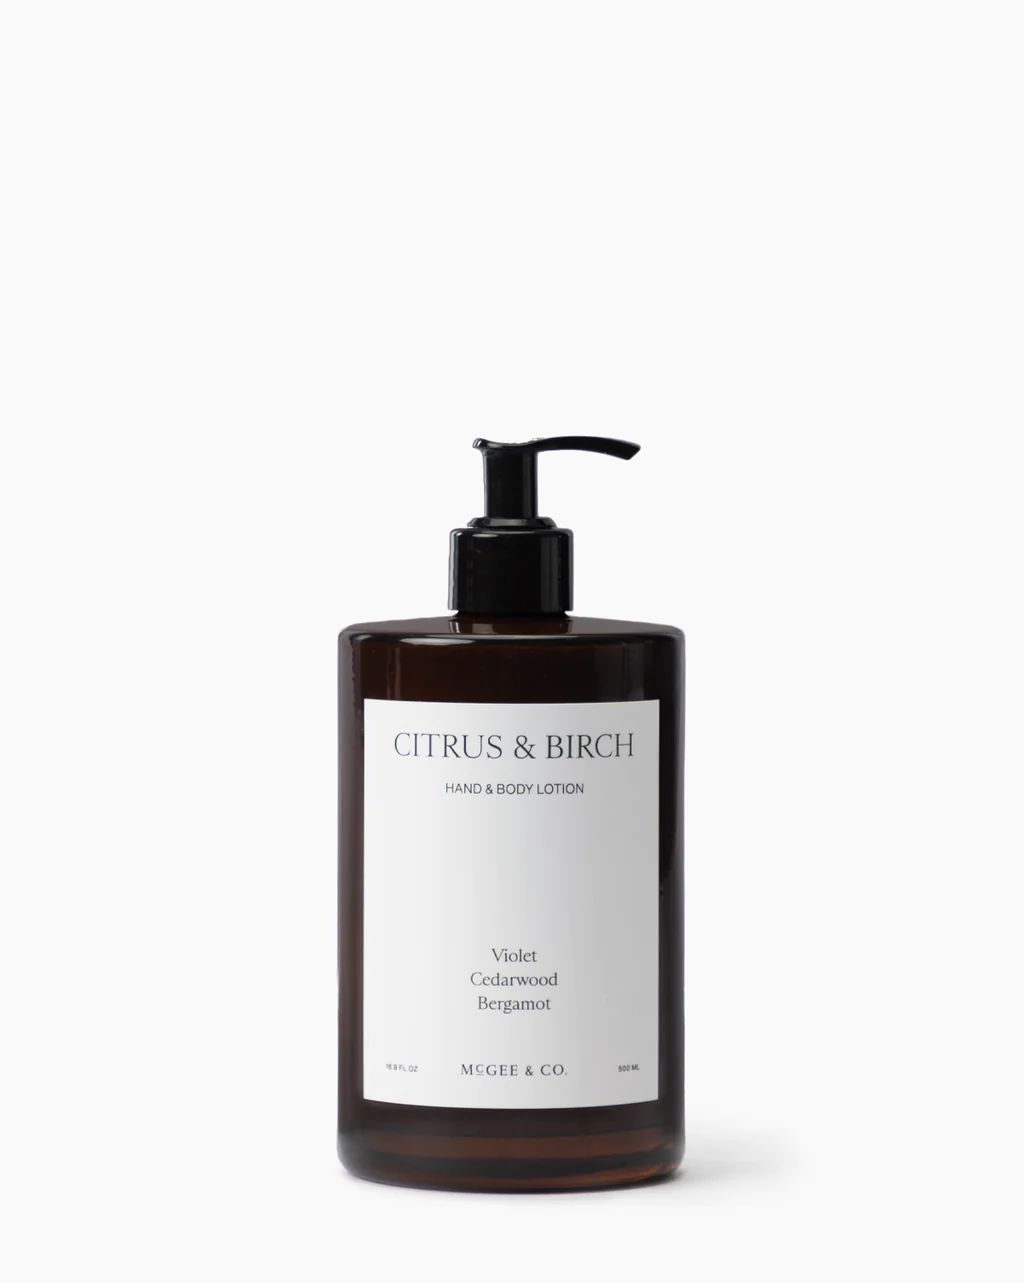 Citrus & Birch Hand Lotion | McGee & Co.